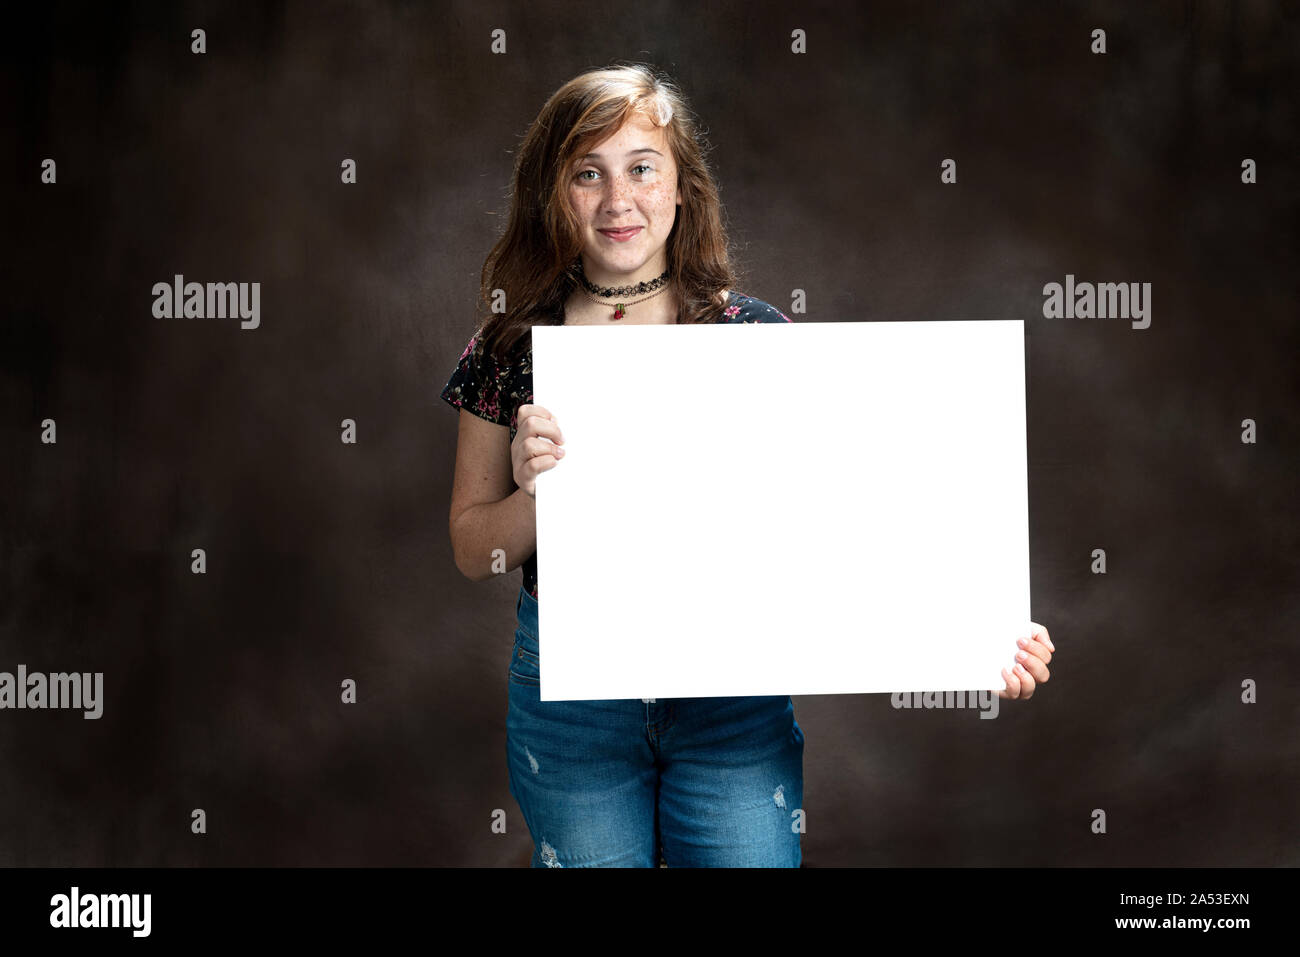 Horizontal shot of an amused pre-teen girl with freckles holding a blank sign. Stock Photo